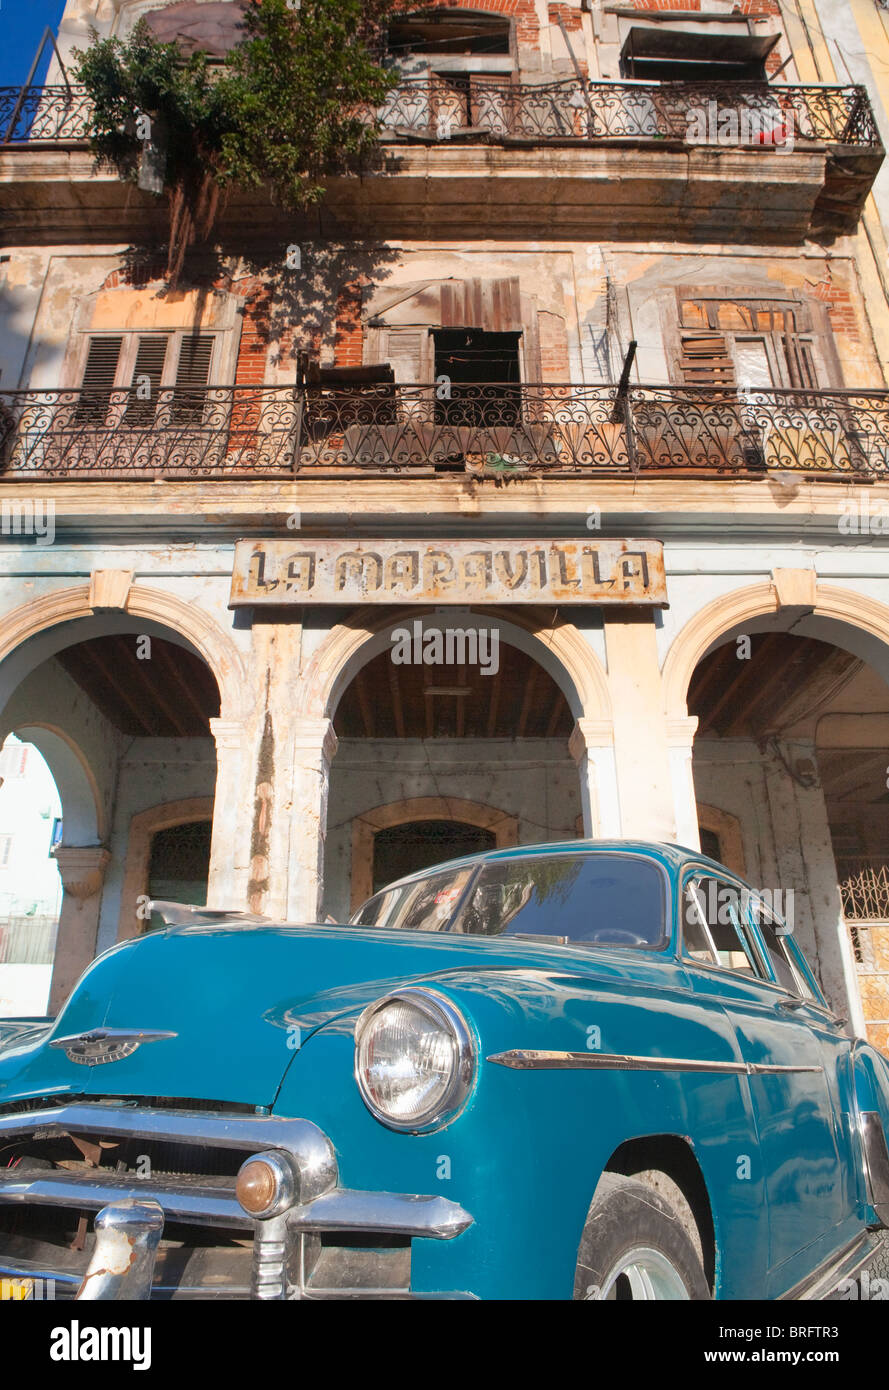 HABANA VIEJA: CLASSIC AMERICAN CAR AND COLONIAL BUILDING Stock Photo